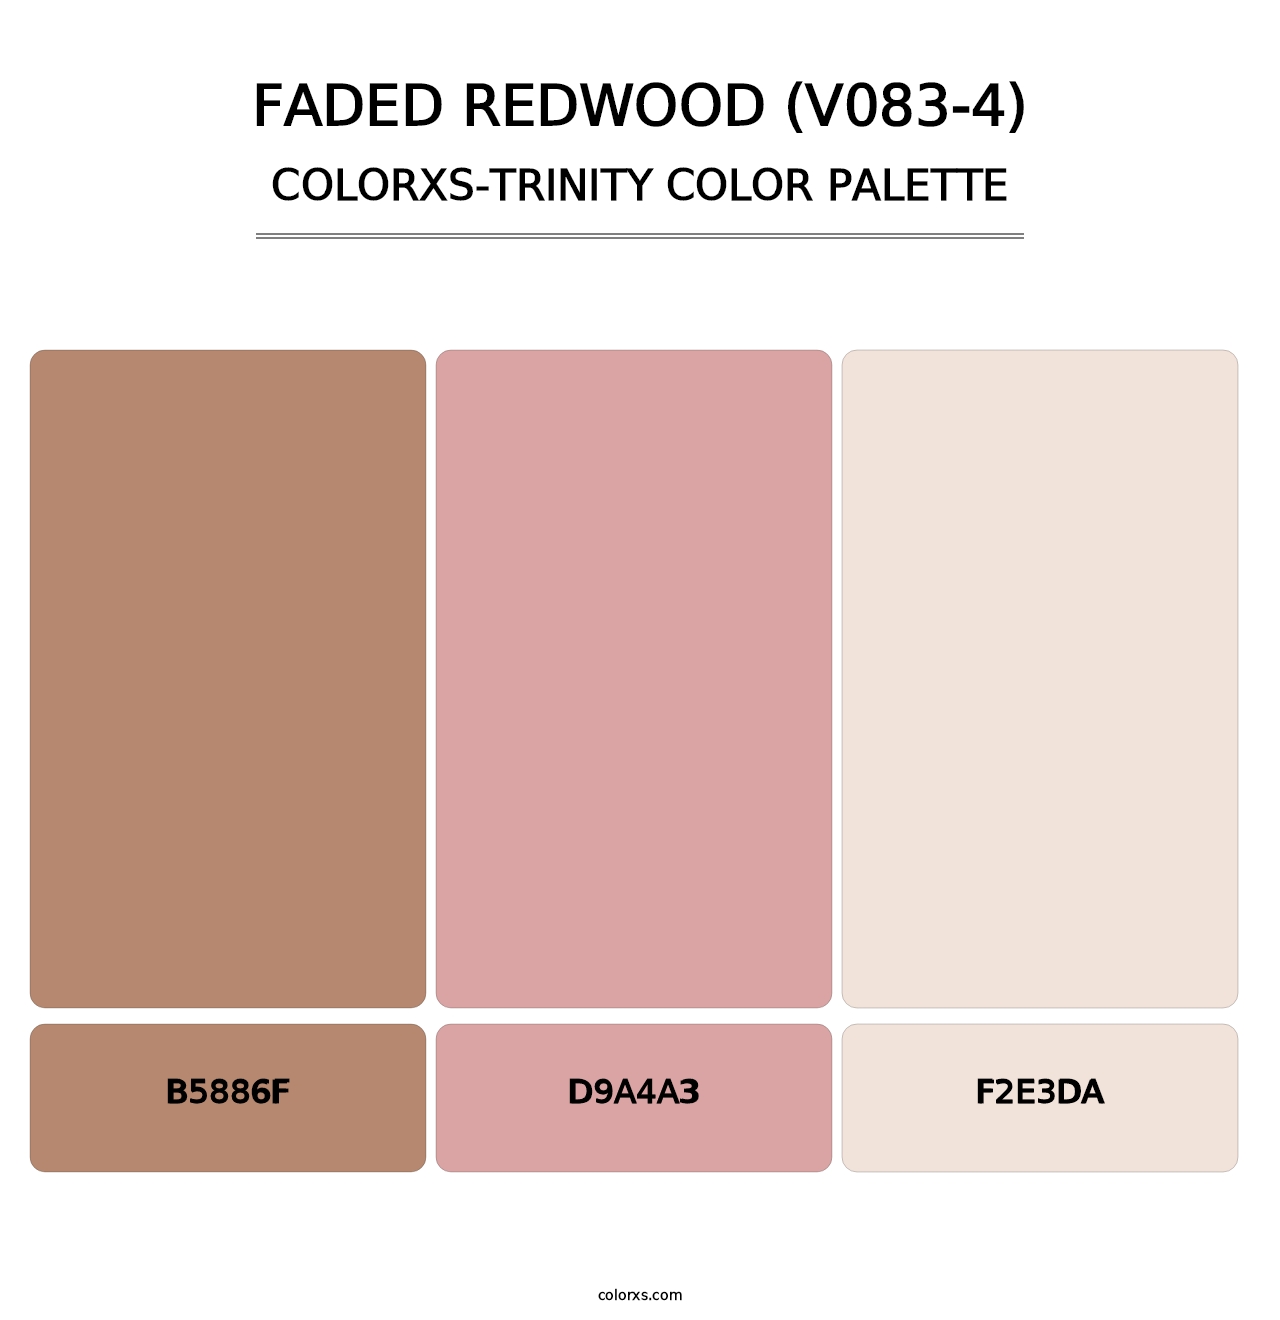 Faded Redwood (V083-4) - Colorxs Trinity Palette